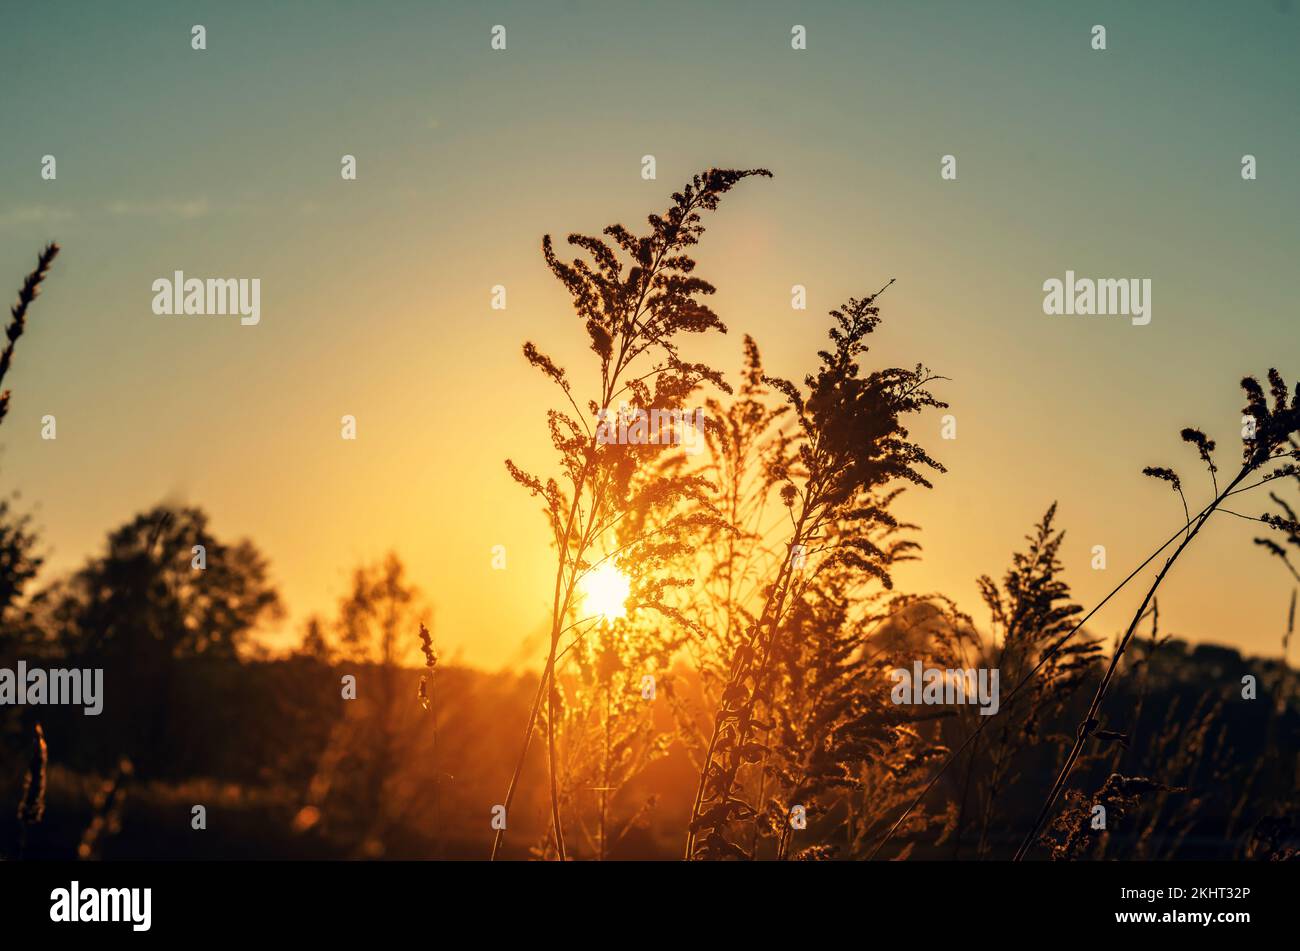 The sun makes its way through dry inflorescences, autumn landscape at sunset evening in nature Stock Photo